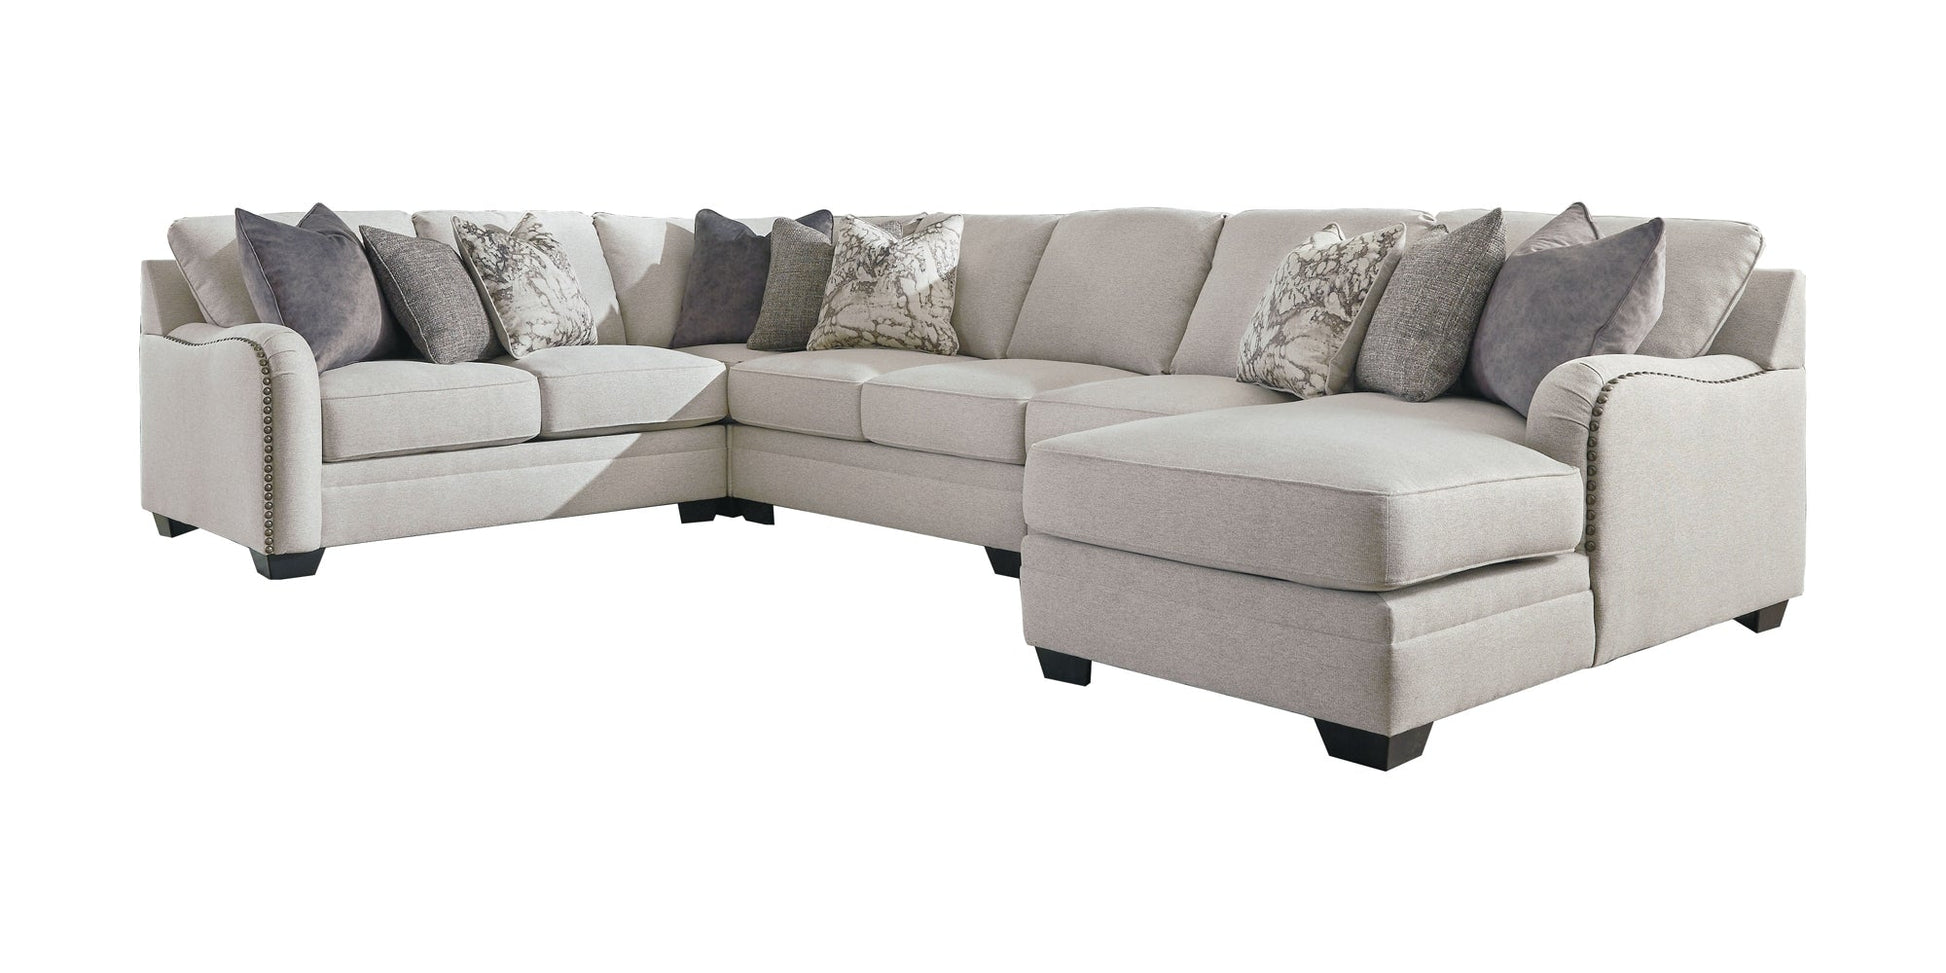 Dellara 5-Piece Sectional with Chaise Smyrna Furniture Outlet